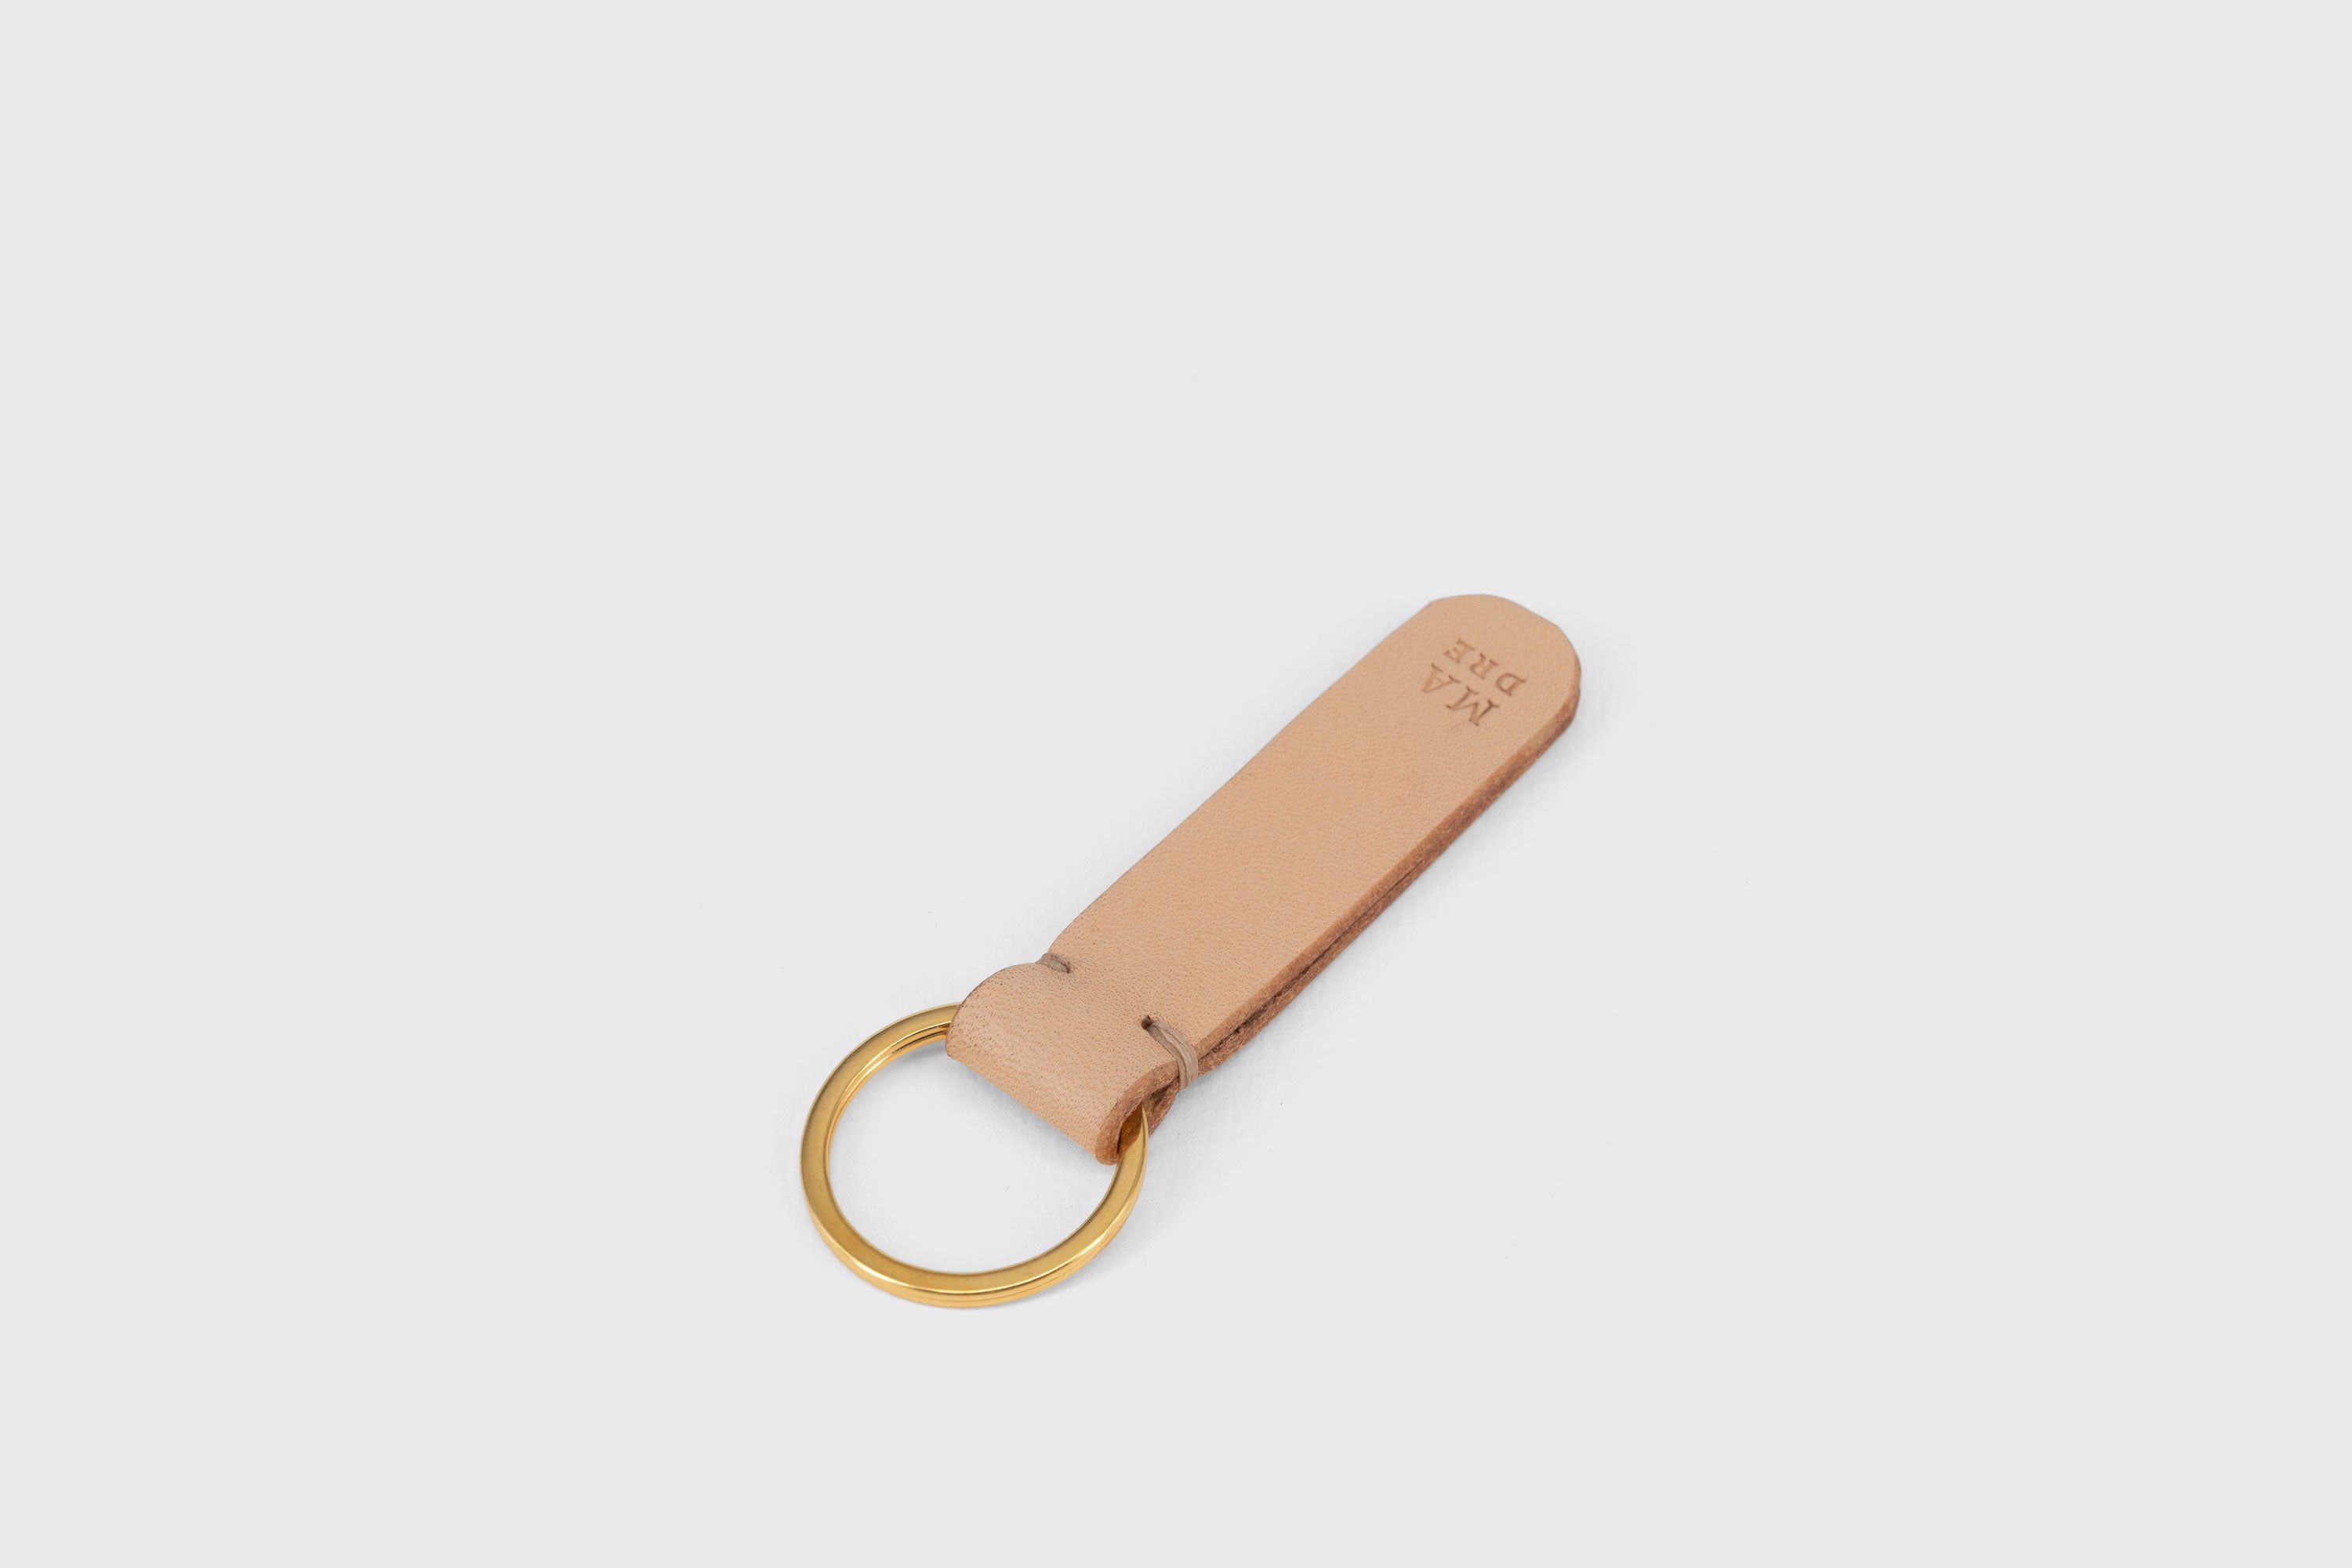 Key Ring Leather Natural Color Fob Minimalist Designer Vegetable Tanned Full Grain Handcrafted Personalised Premium Quality Gold Atelier Madre Manuel Dreesmann Barcelona Spain